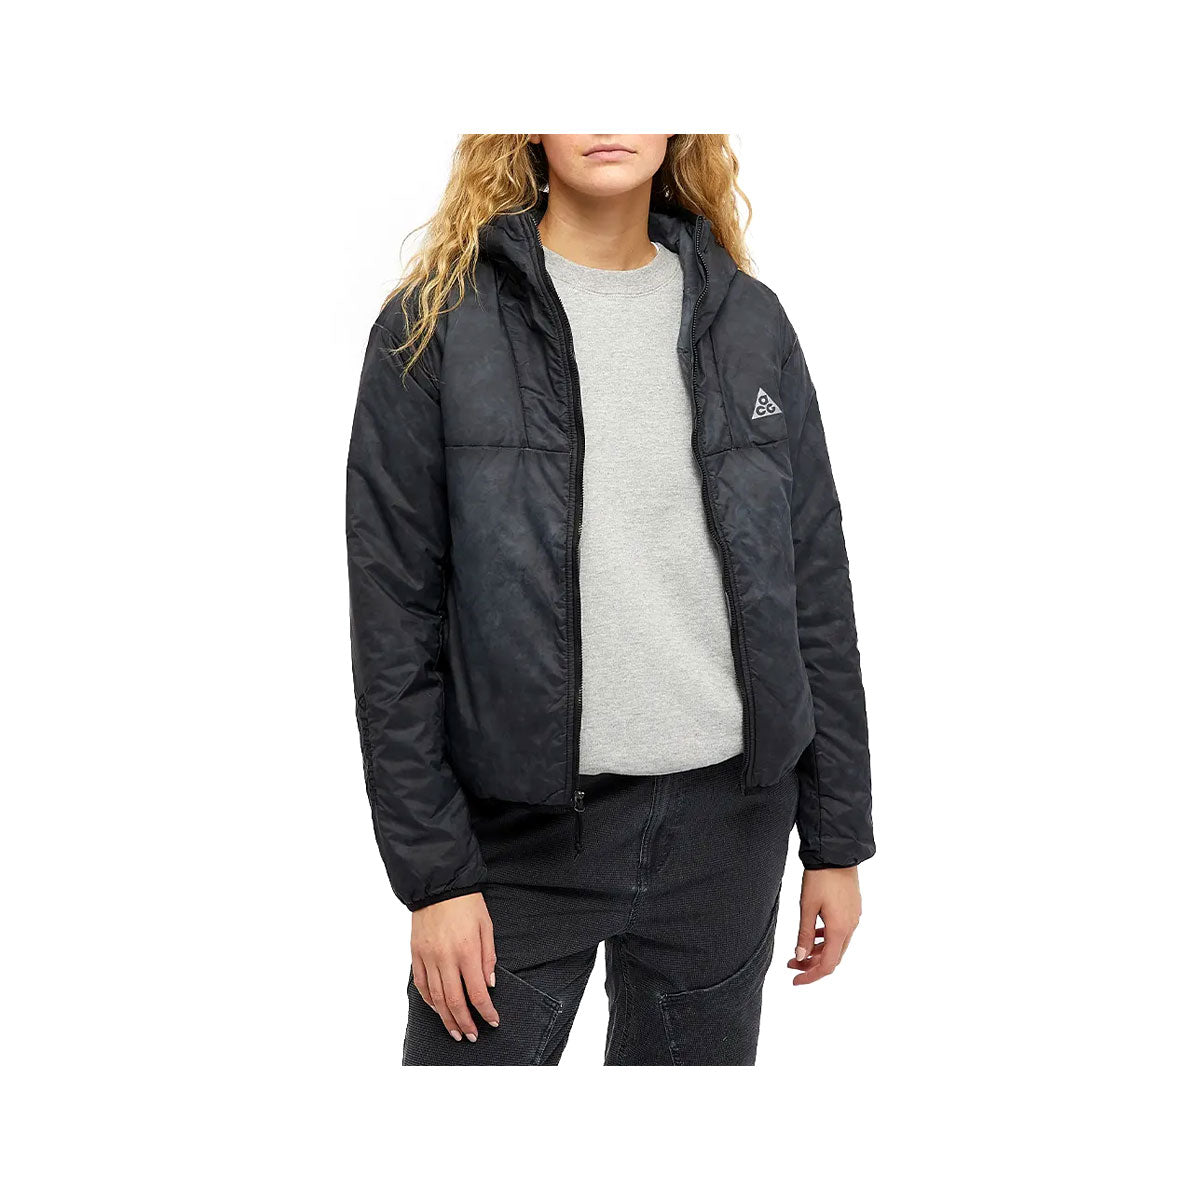 Nike Women's Therma-FIT Rope De Dope Jacket - KickzStore